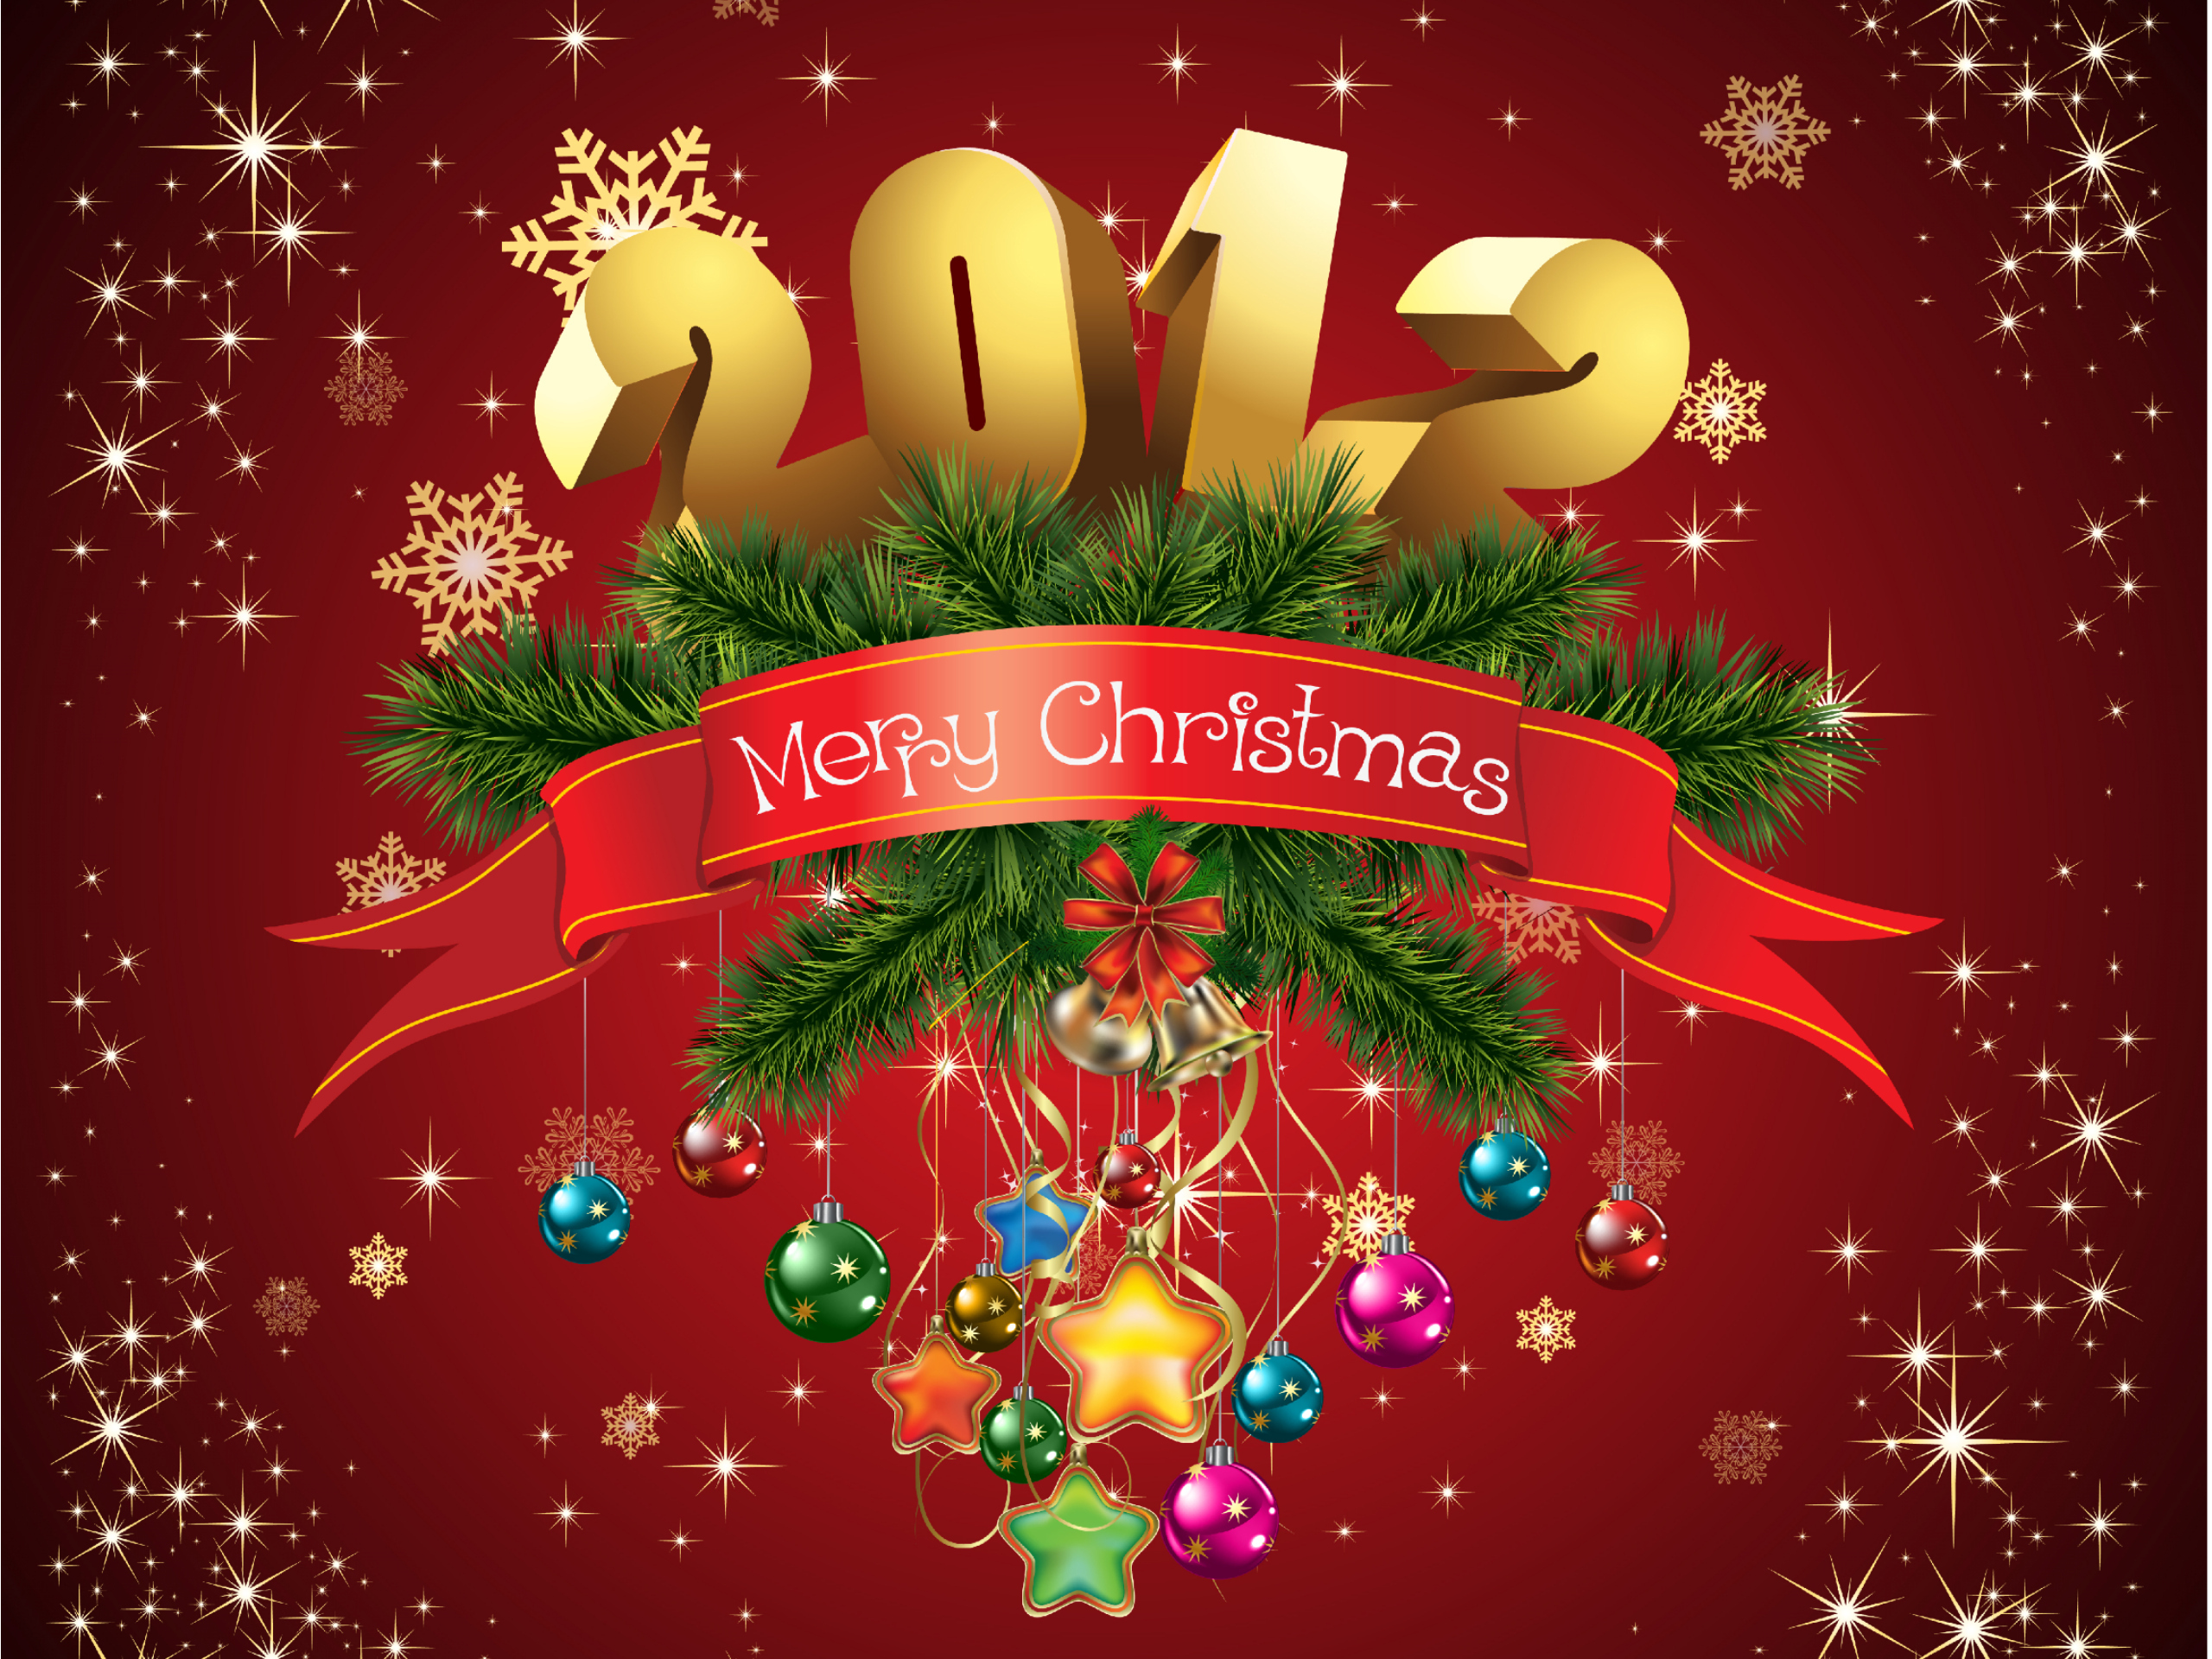 Holiday New Year 2012 HD Wallpaper | Background Image